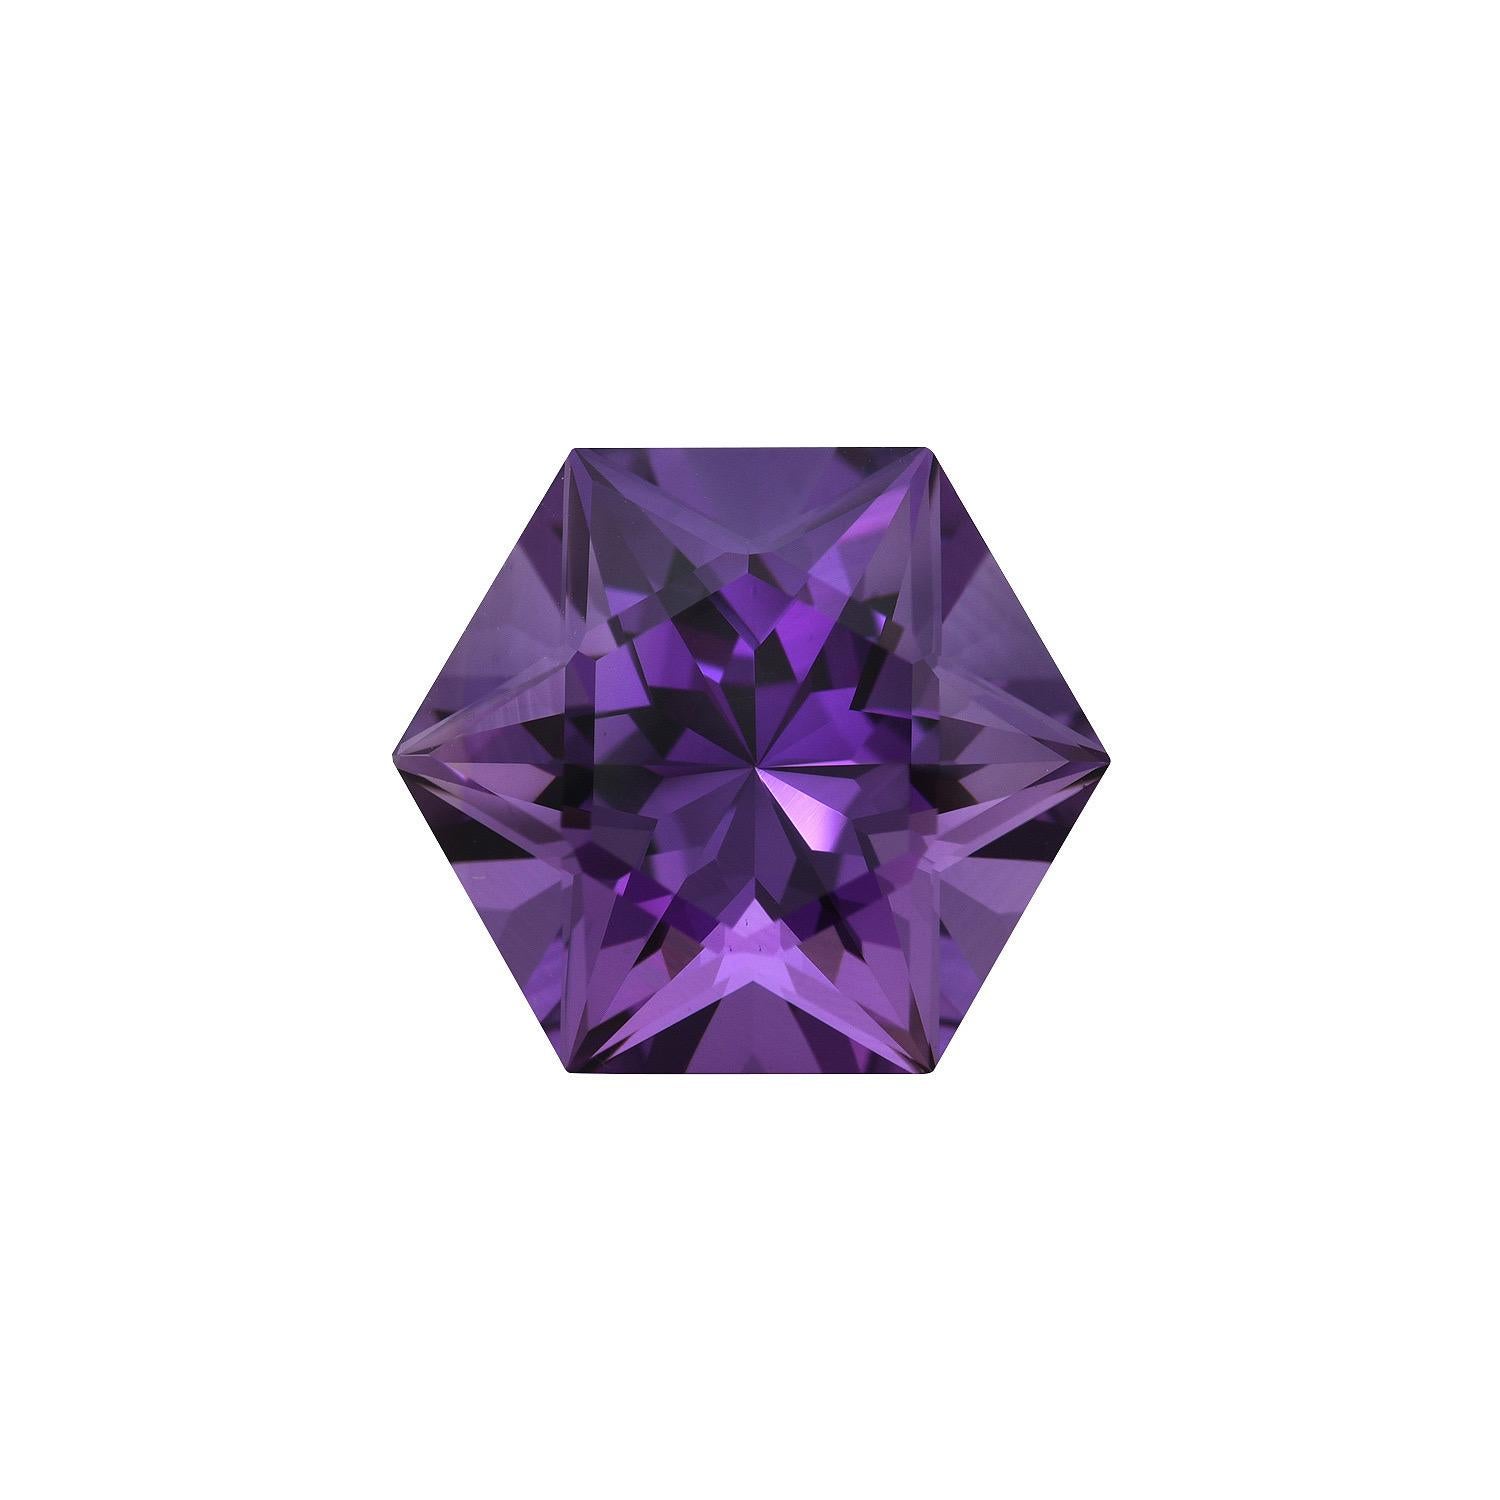 Unique 12.13 carat hexagon Amethyst gem offered loose to a special lady or gentleman. The cutting pattern of this special Amethyst showcases a Star of David.
Returns are accepted and paid by us within 7 days of delivery.
We offer supreme custom